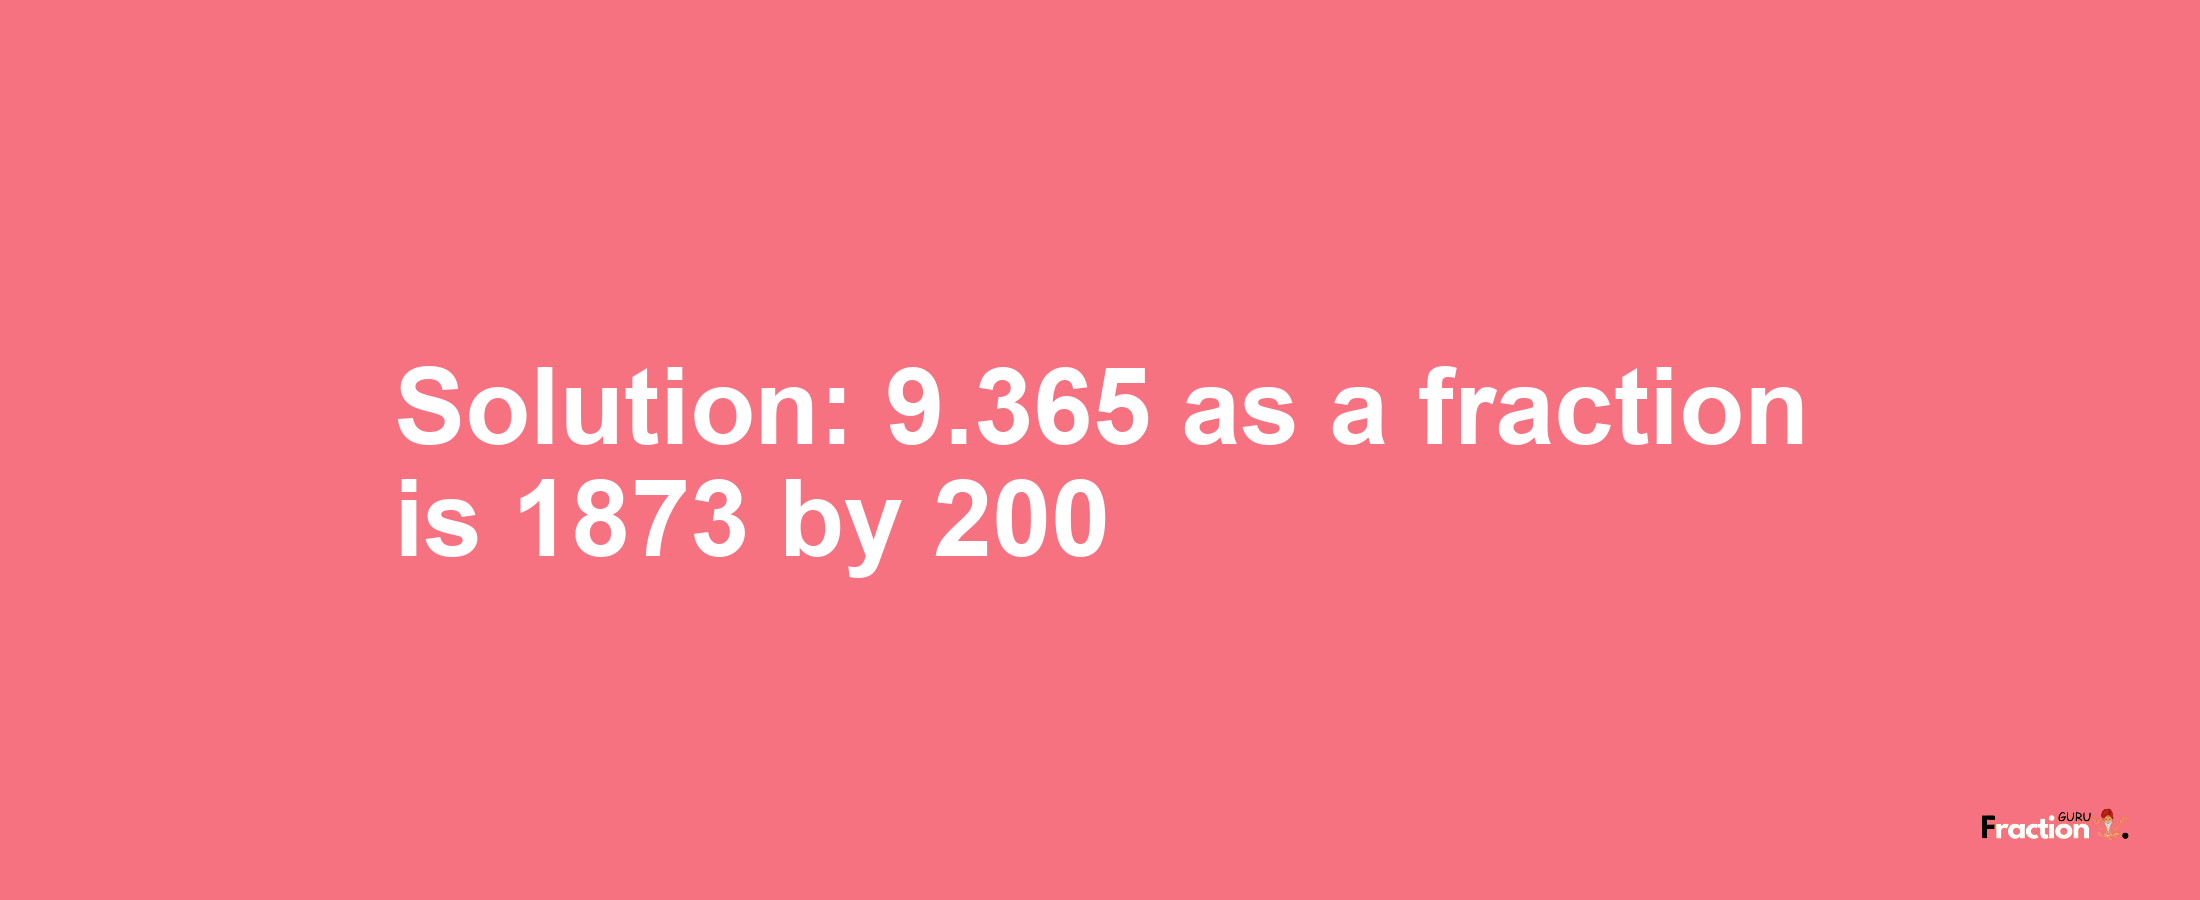 Solution:9.365 as a fraction is 1873/200